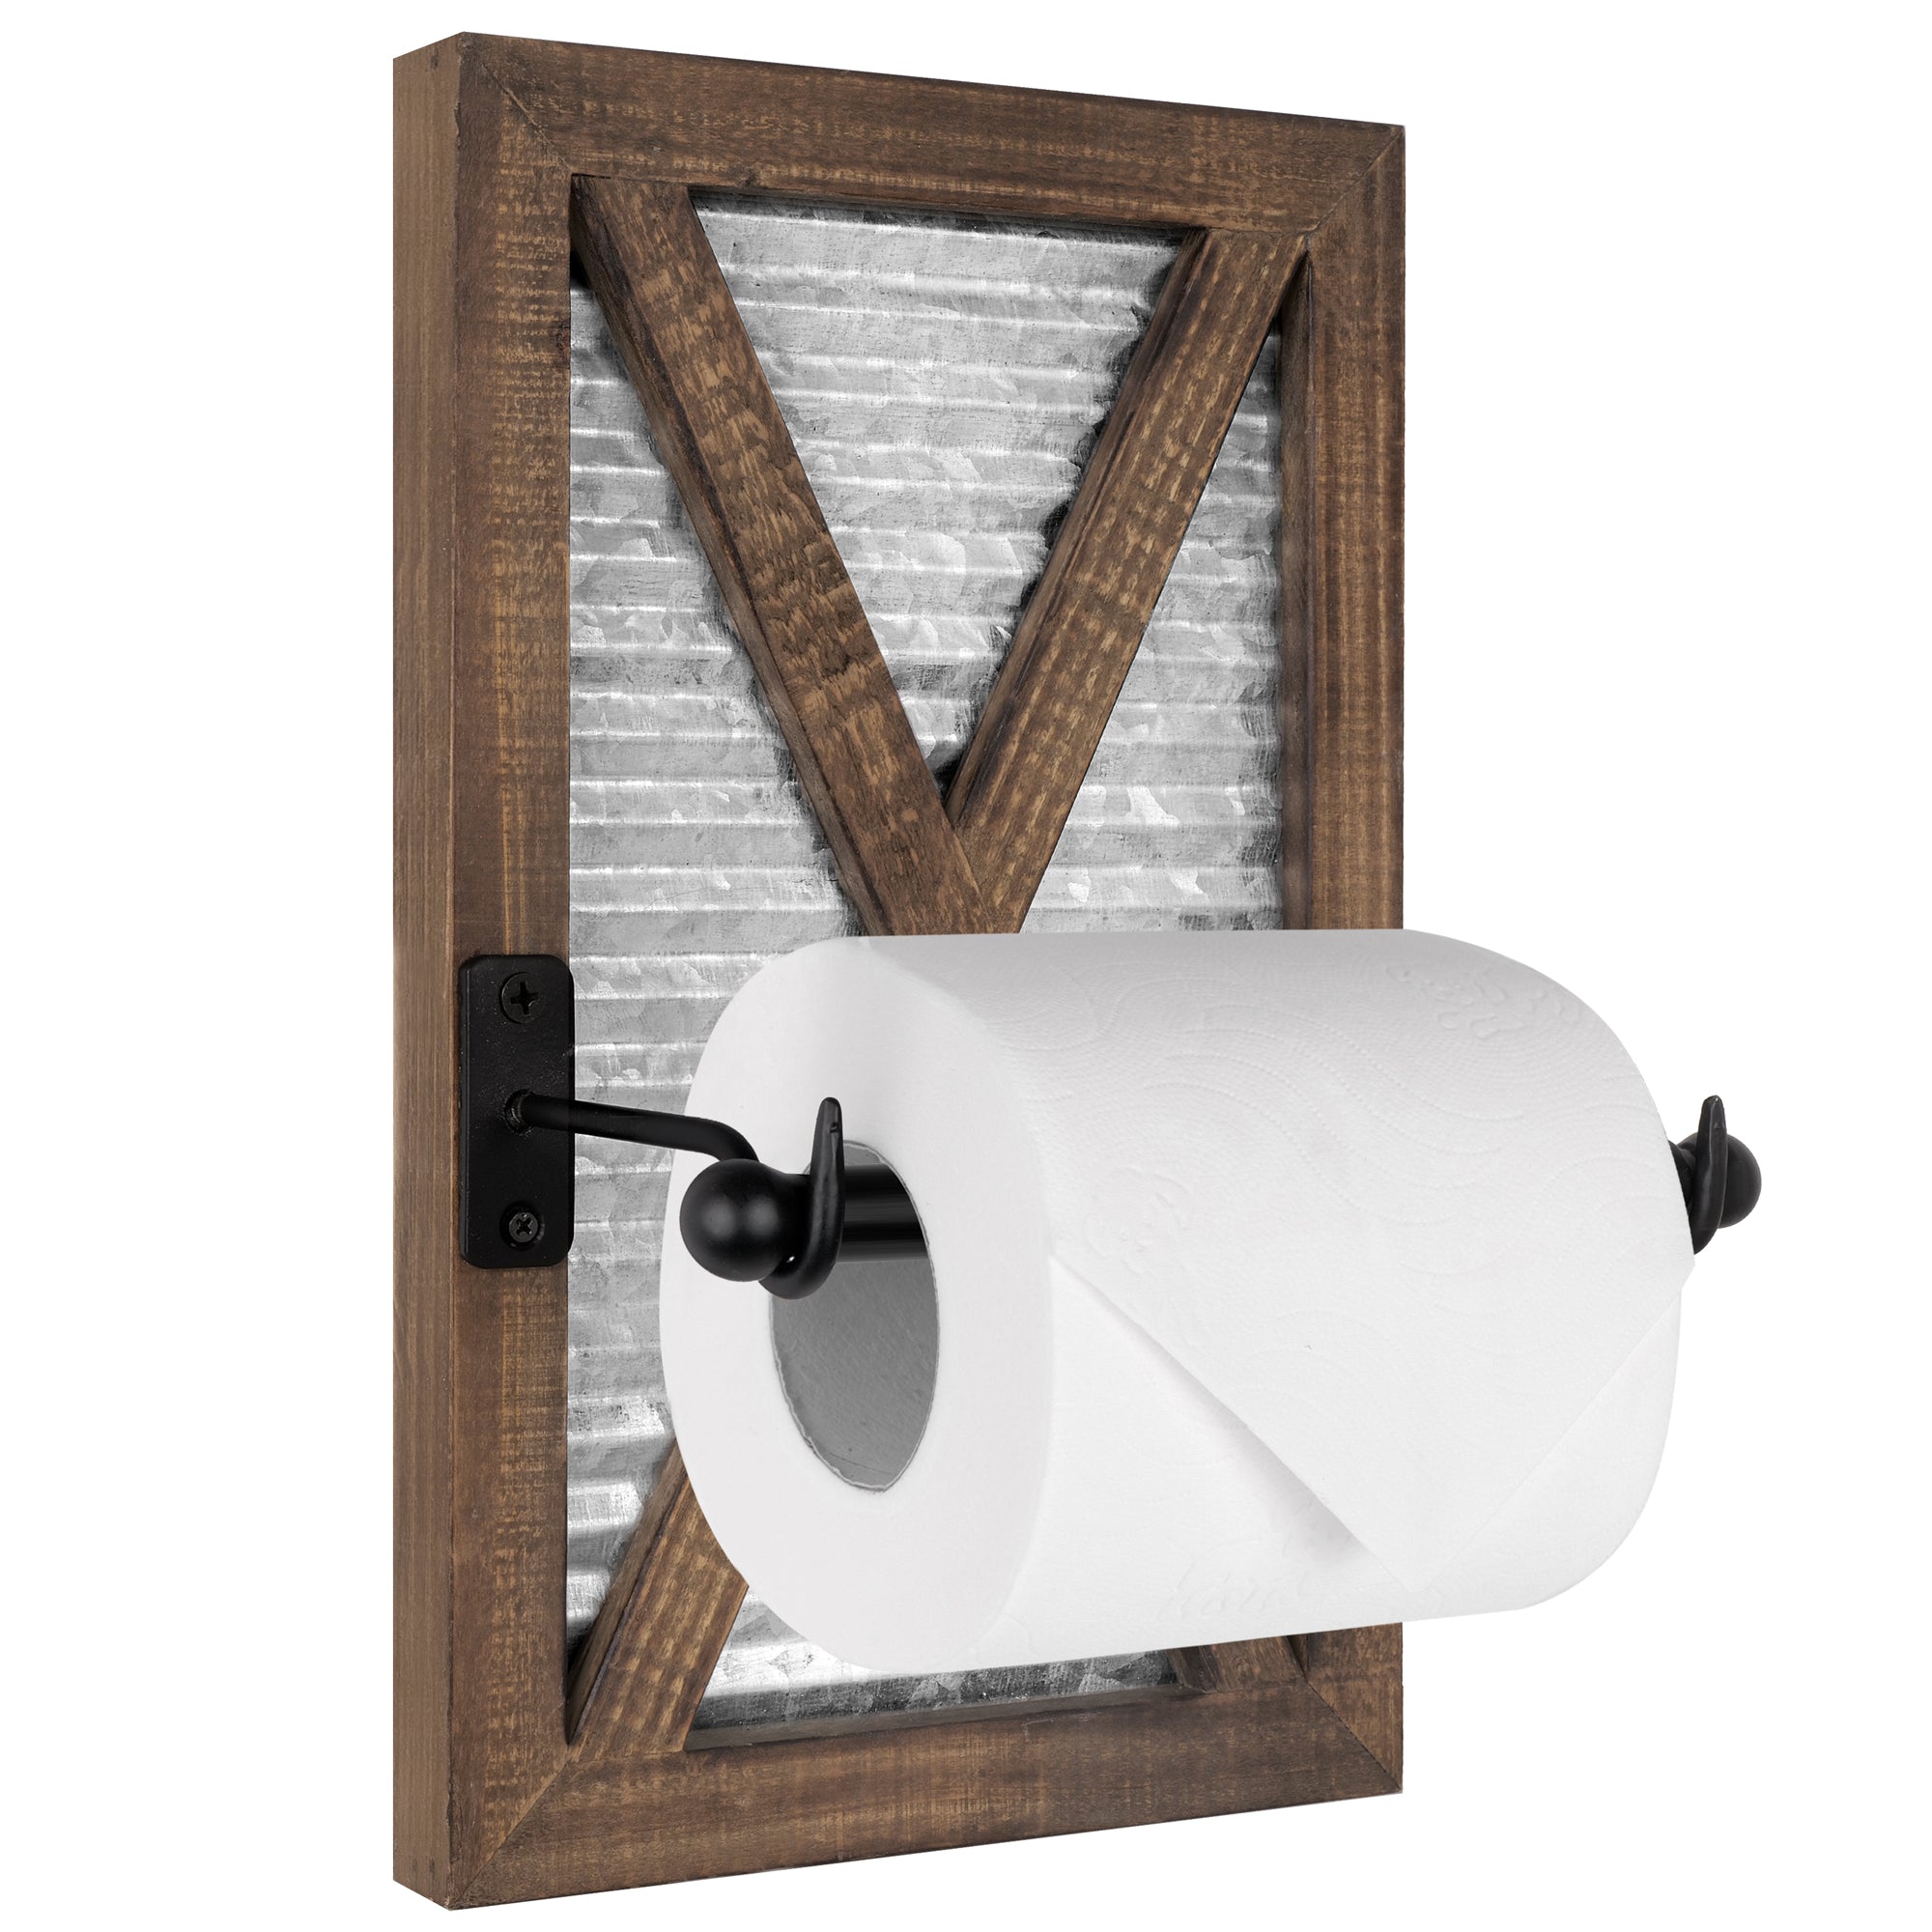 Autumn Alley TPH008 Wall Mount Toilet Paper Holder